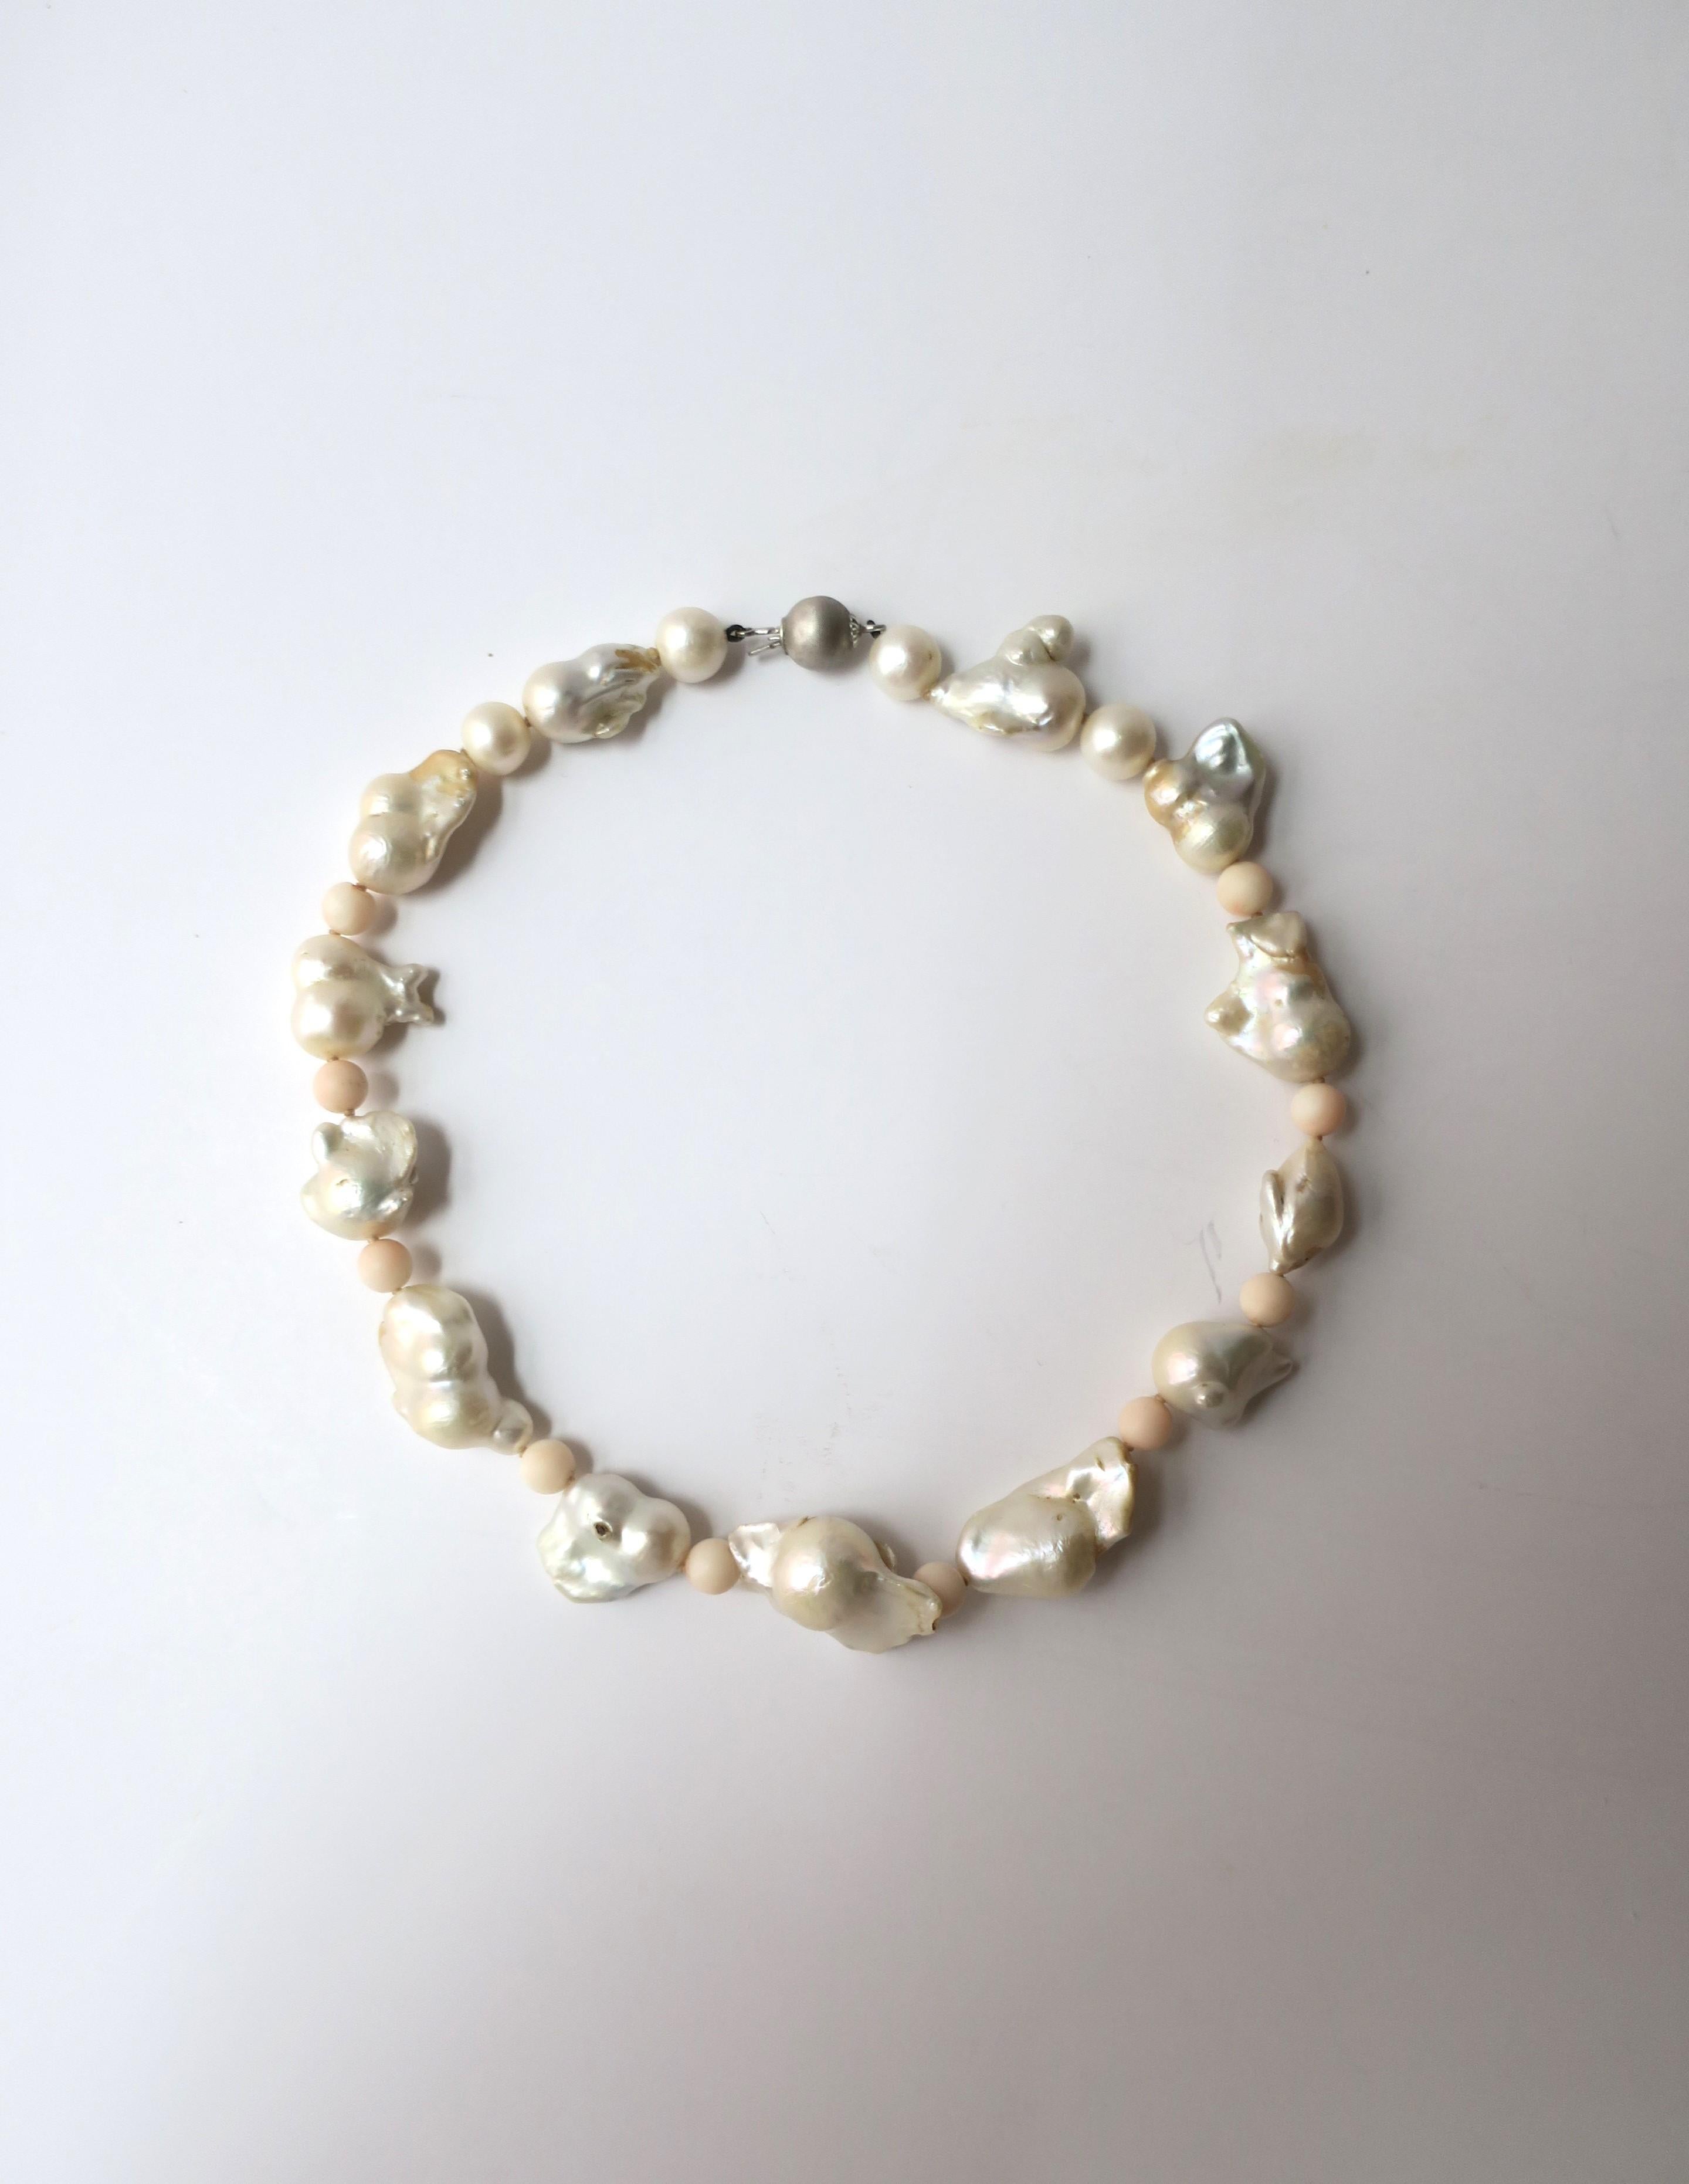 A very beautiful necklace of large baroque white freshwater pearls, light pink coral beads, cultured white pearls, and one 18-karat white gold bead/clasp (looks like a gray pearl.) Necklace is beautifully strung with knotting in-between each pearl